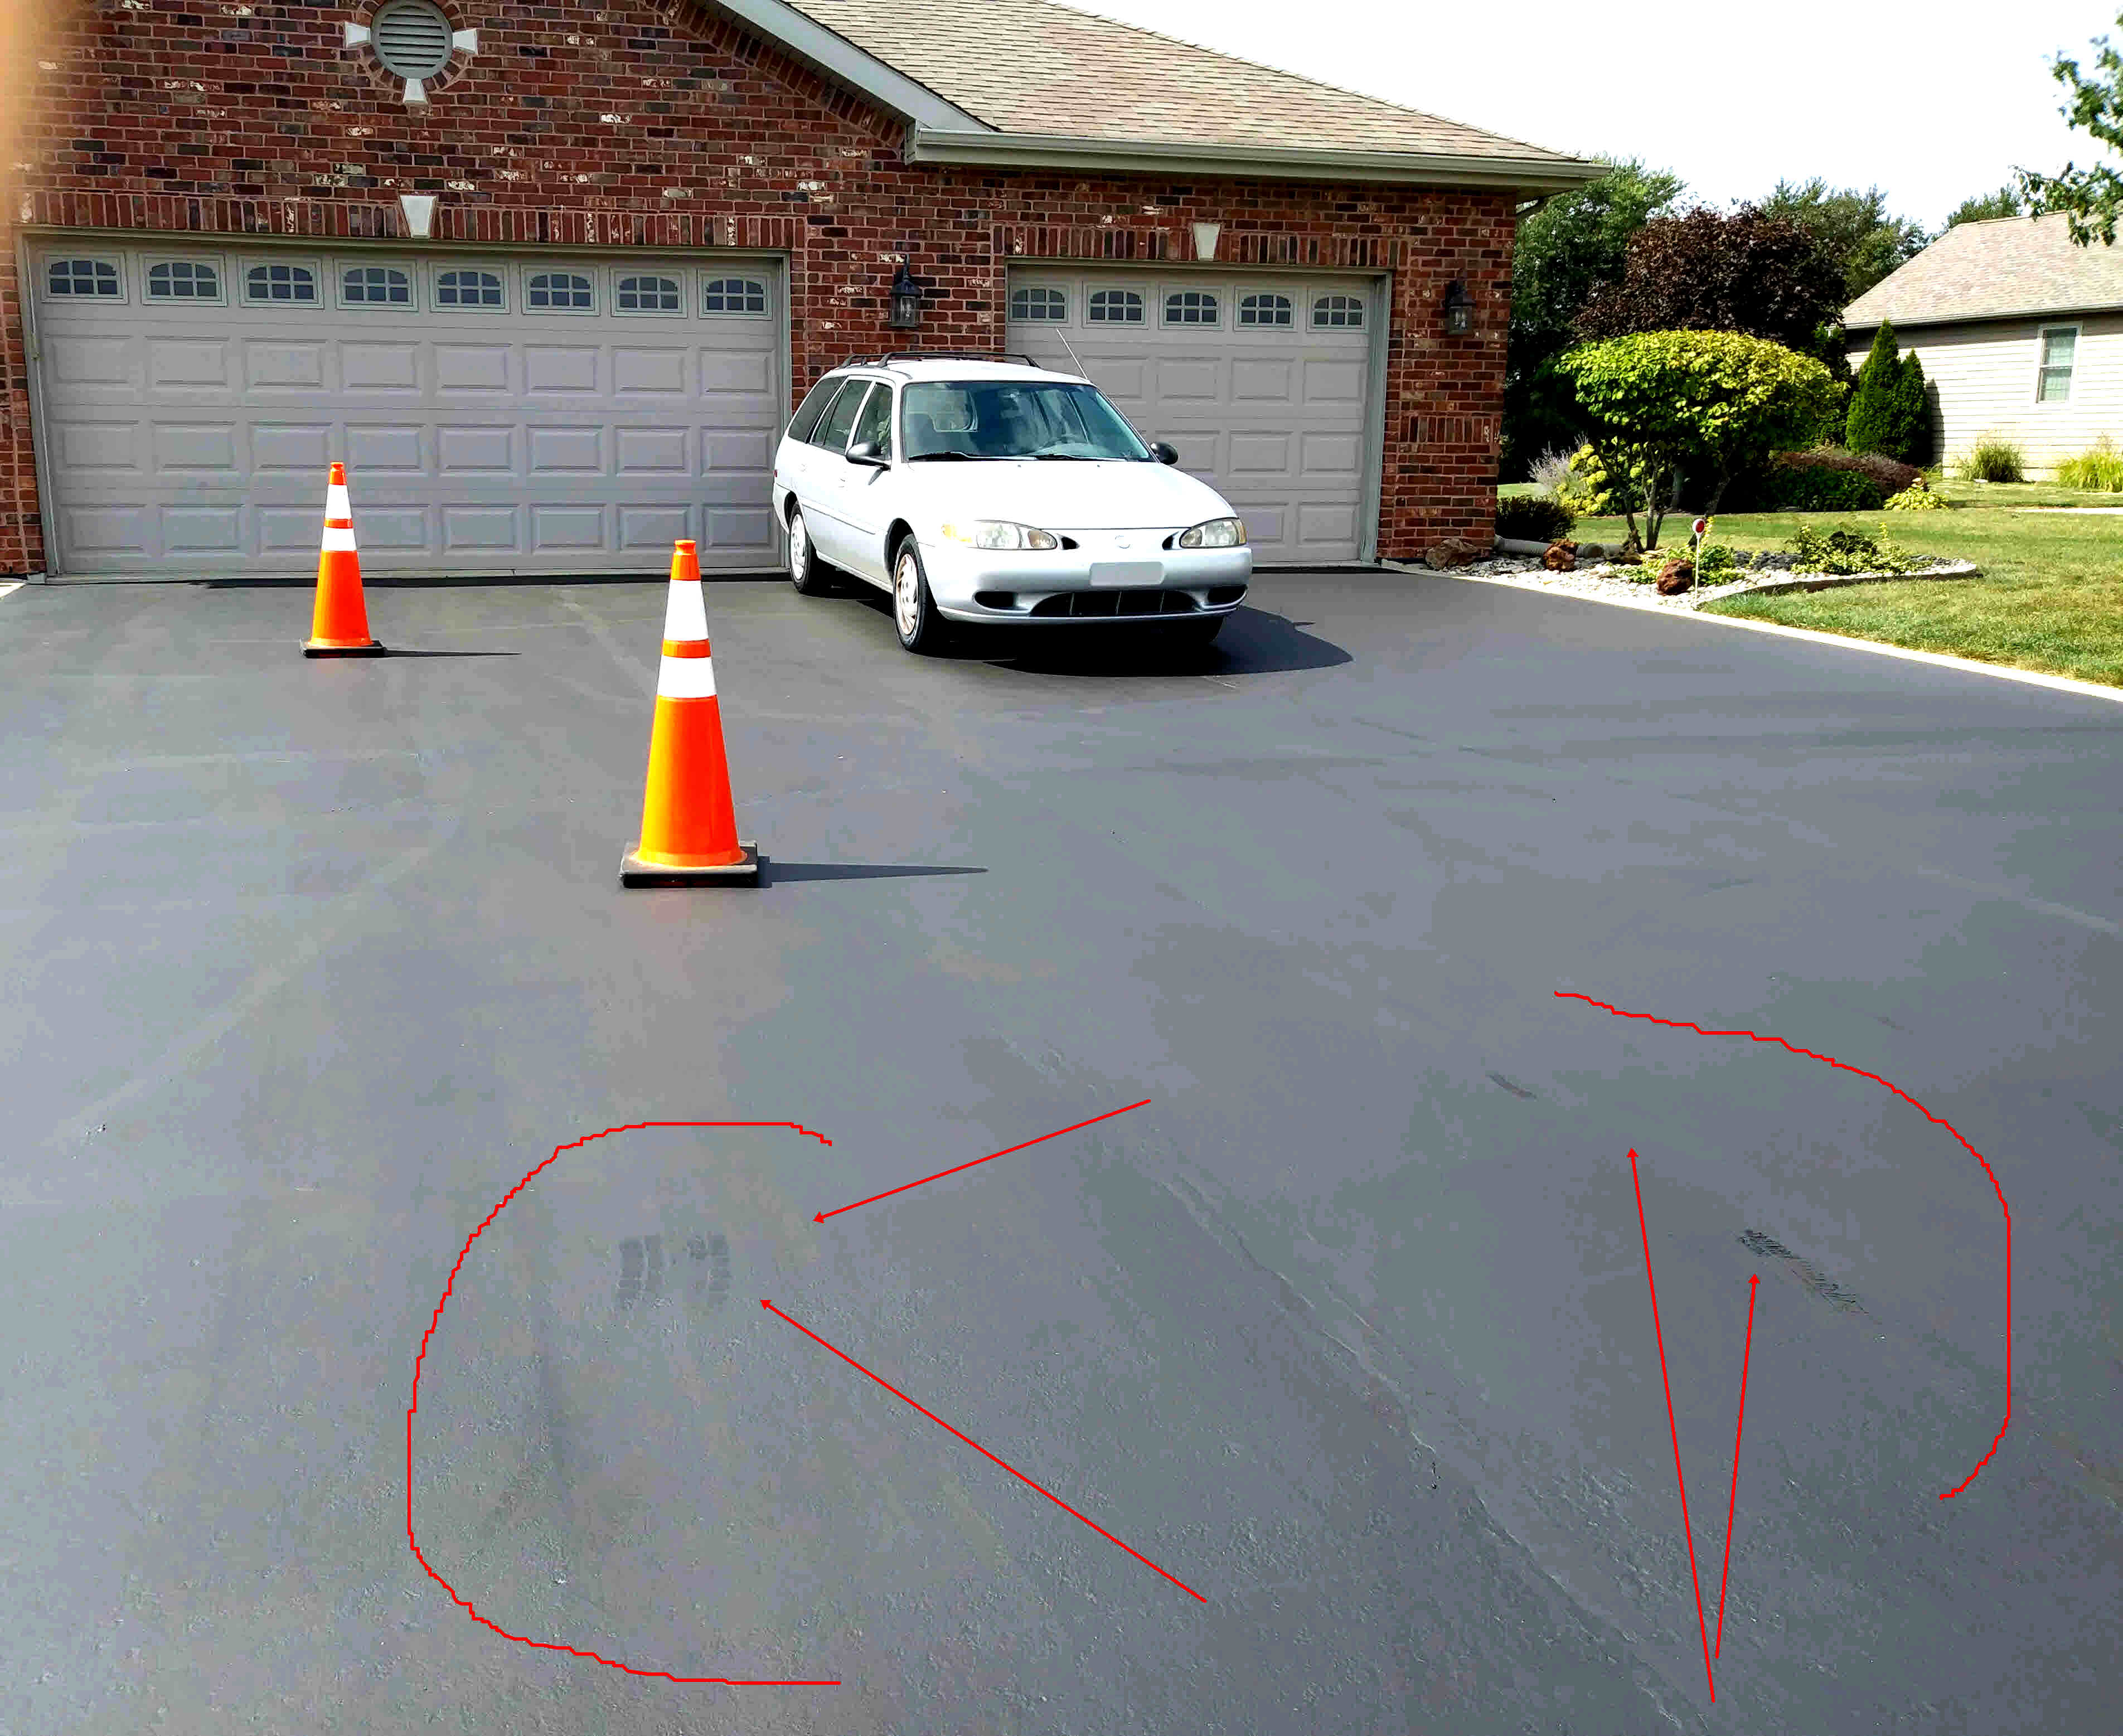 CONES SO NO ONE WOULD PARK ON IT A WEEK LATER